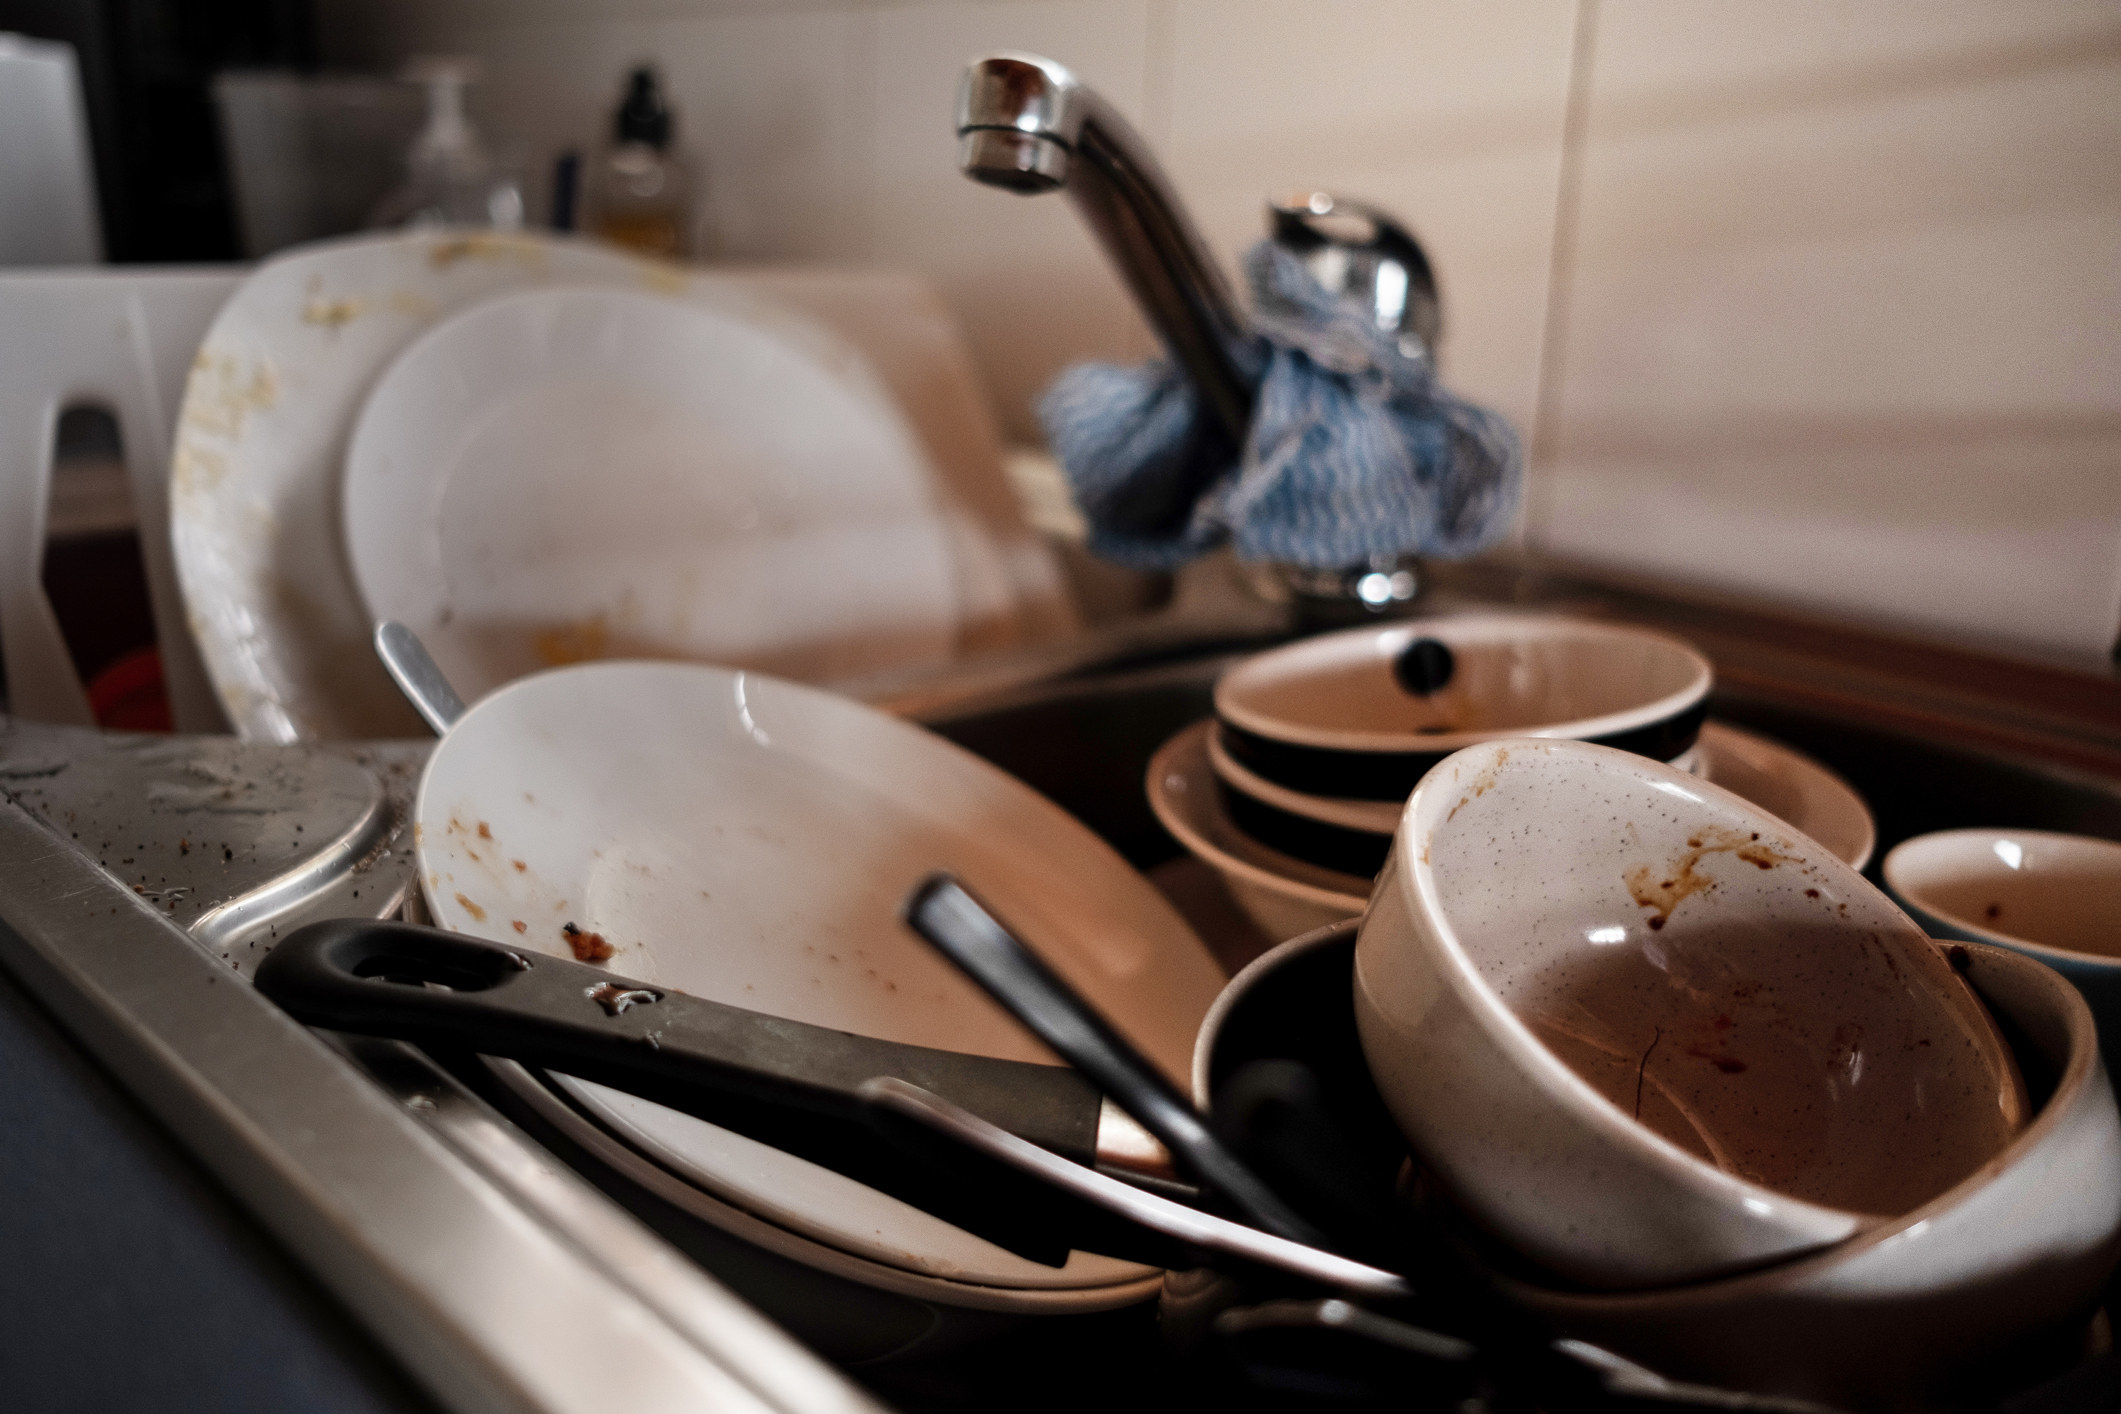 A pile of unwashed dishes stacked in a kitchen sink.